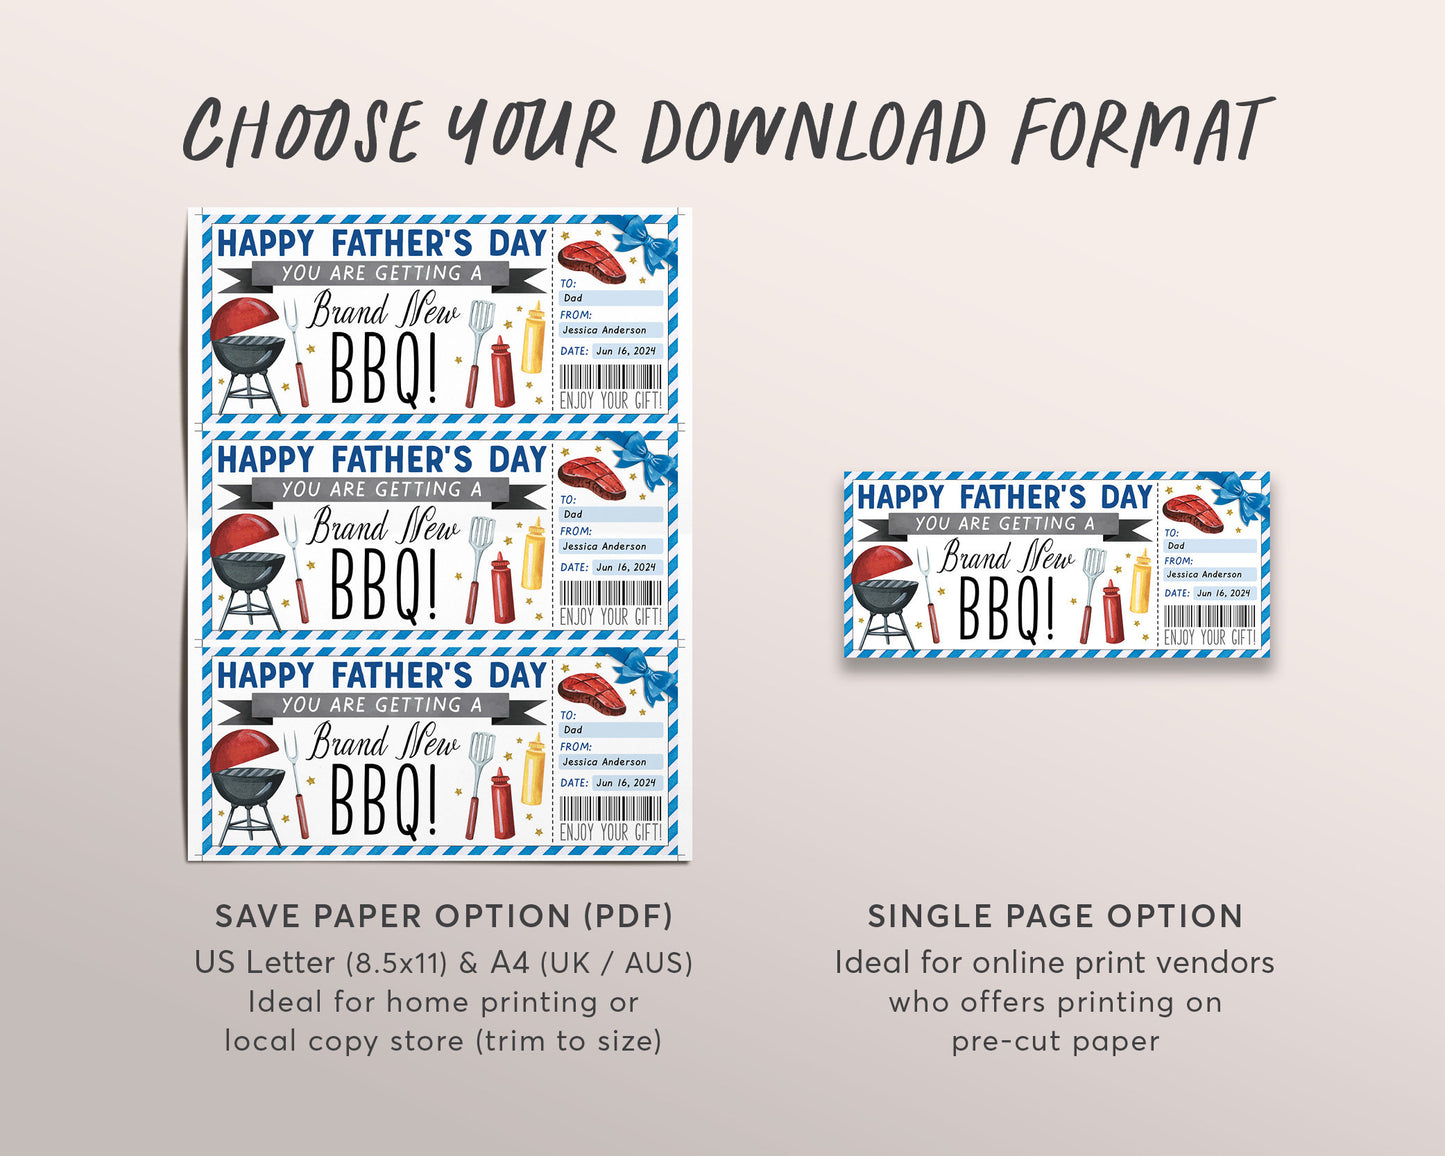 BBQ Voucher Gift Certificate Editable Template, Fathers Day Brand New BBQ Grill For Dad, Barbecue Dinner Meal Coupon Ticket Outdoor Cooking